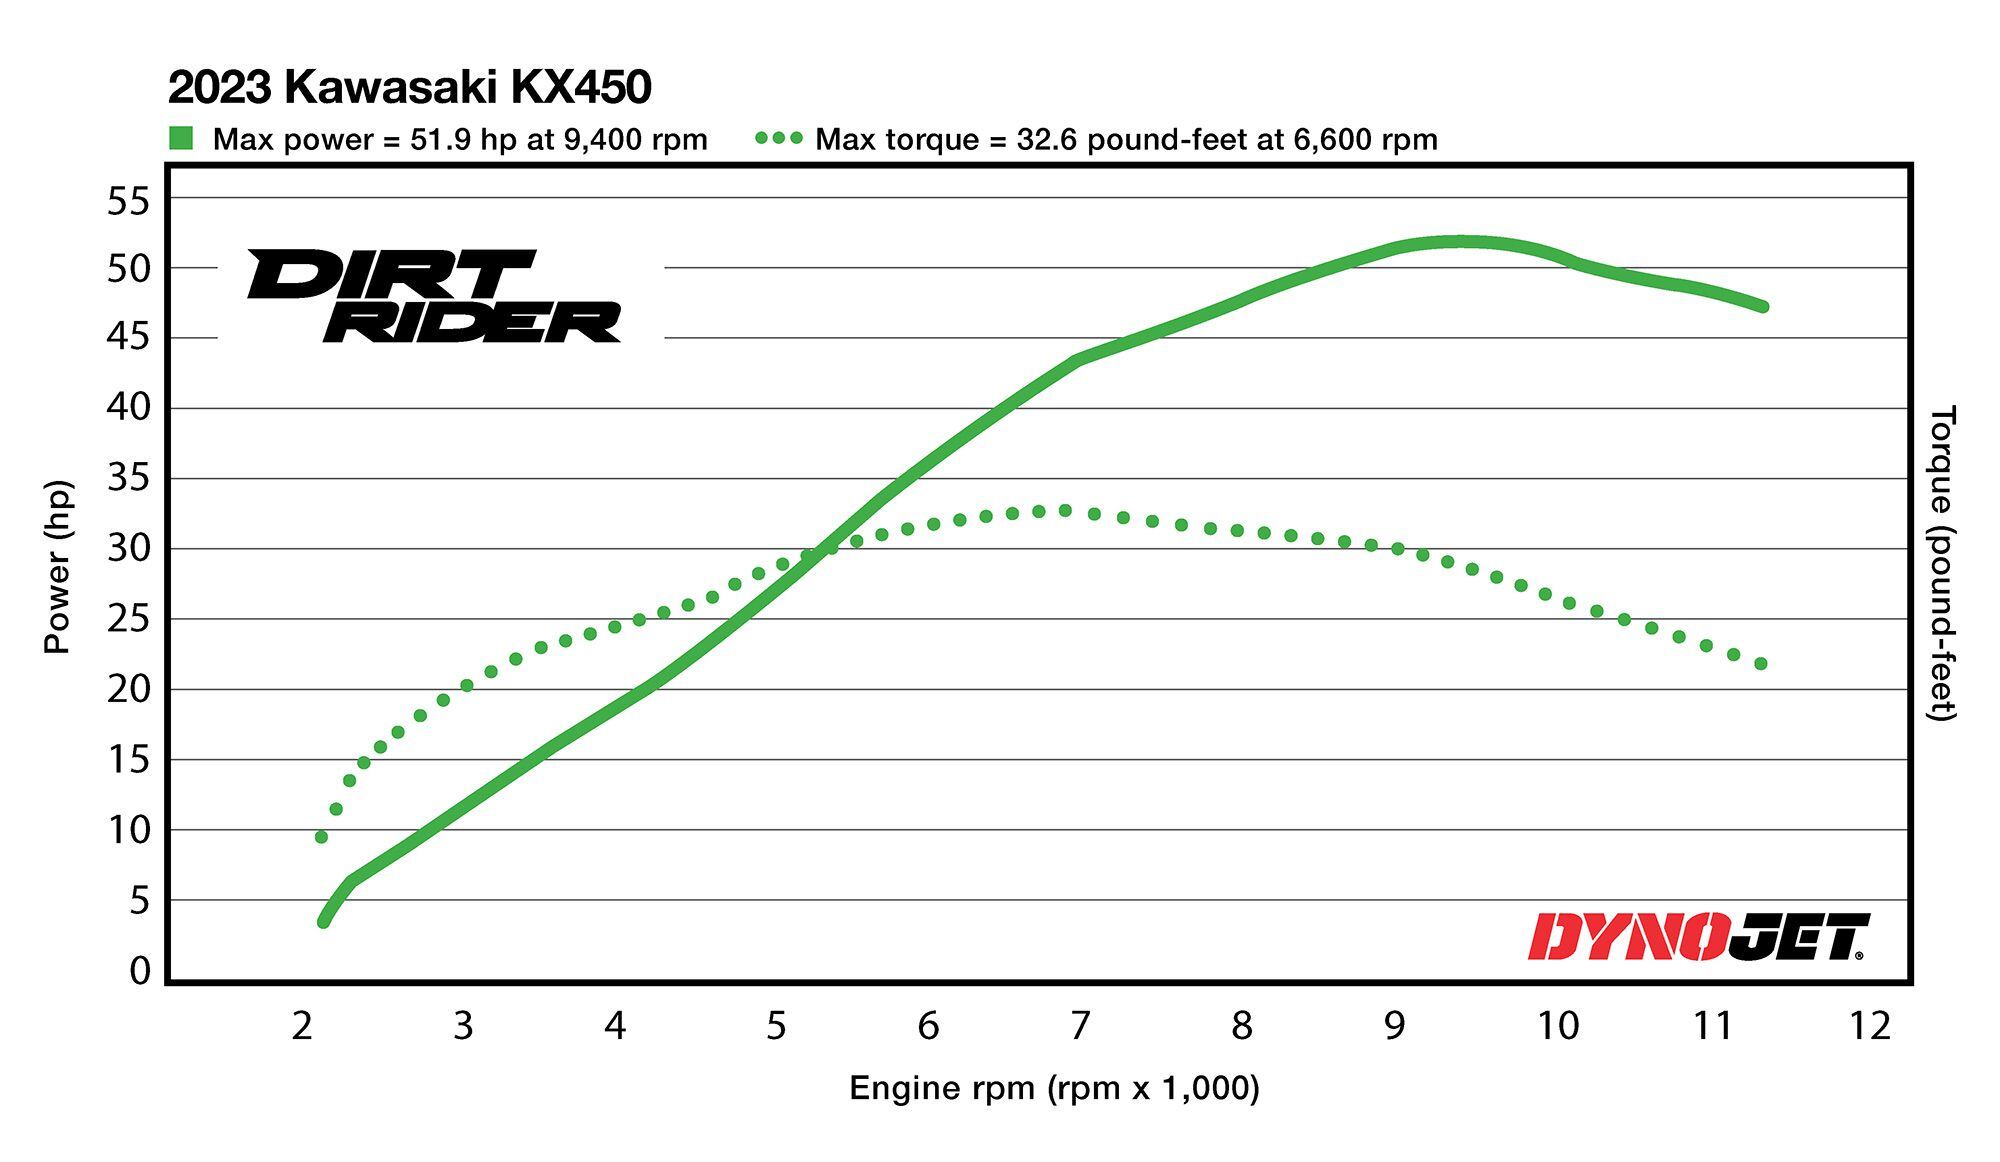 Of the bikes gathered here, the KX450 makes the least horsepower and torque from 7,000 rpm to 11,000 rpm.